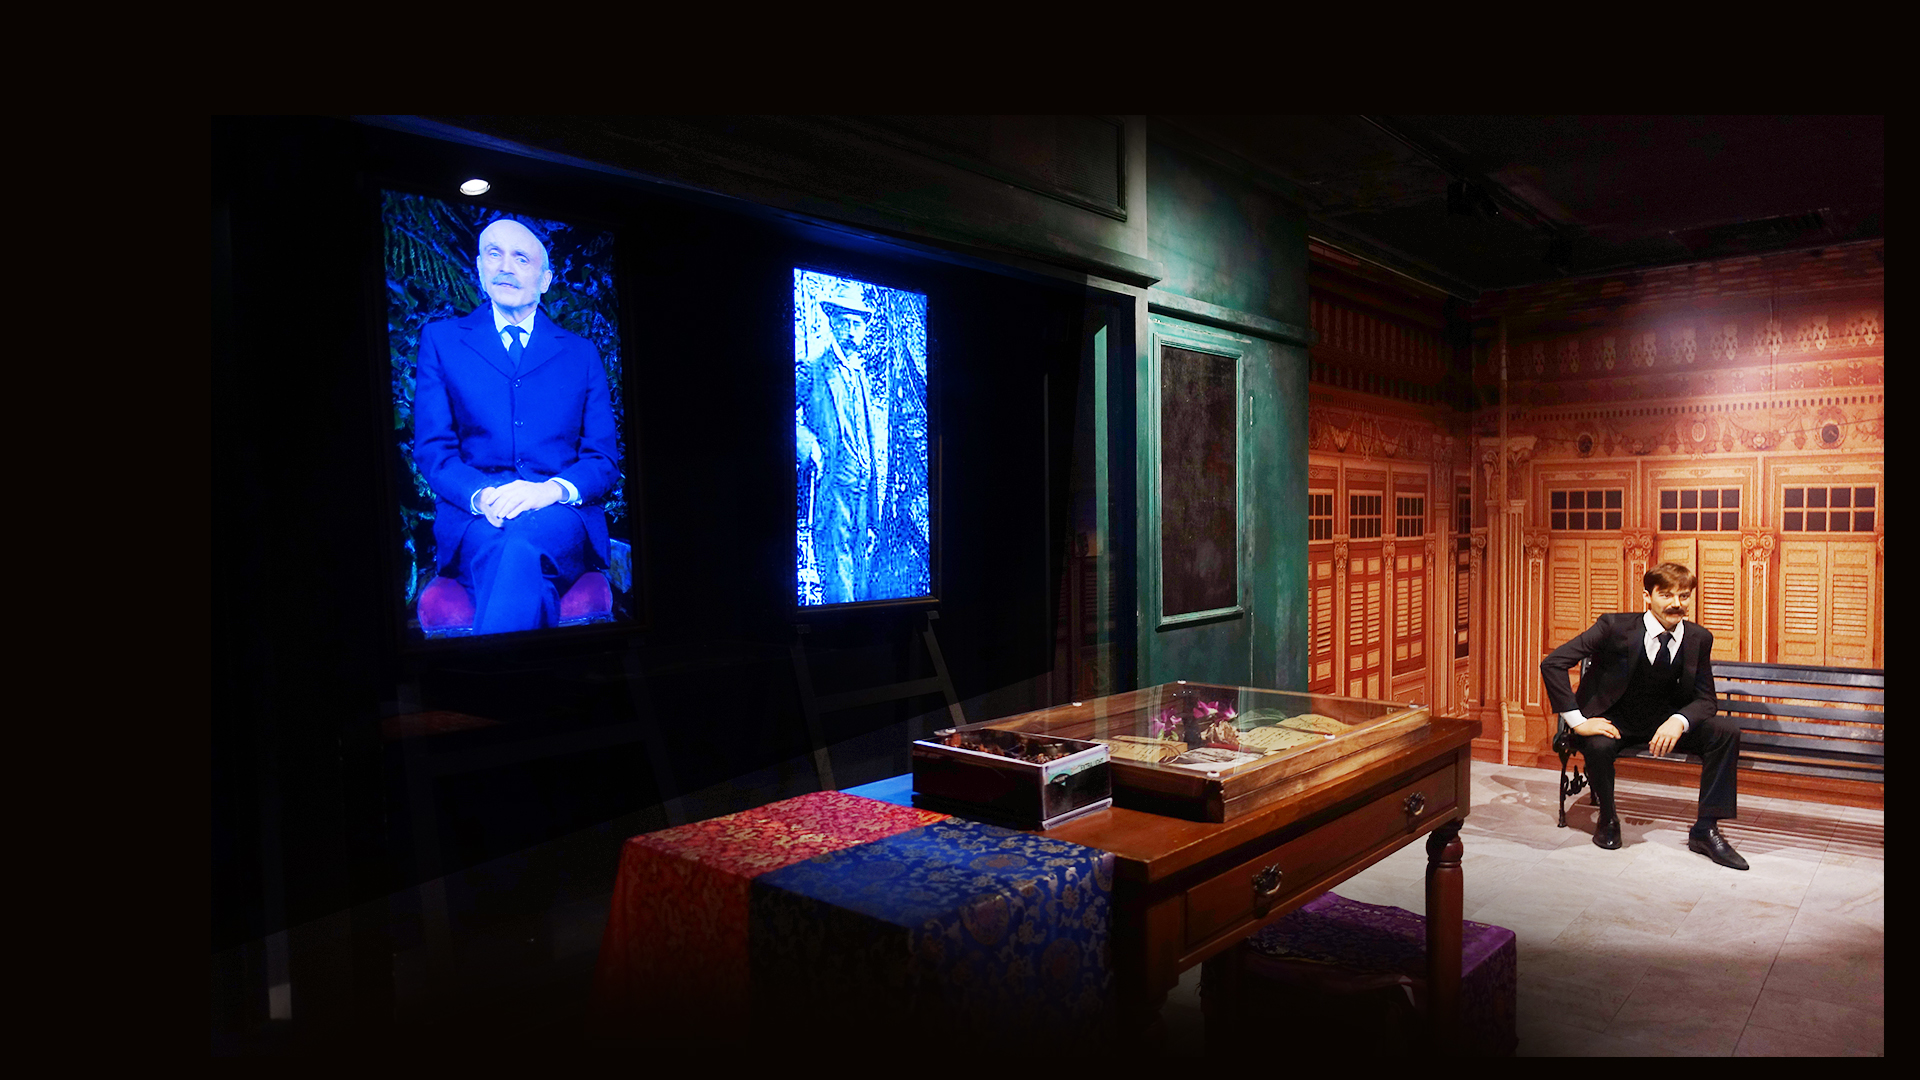 A man in suit is sitting on a bench with a hand propped on his leg. He is sitting in Singapore's financial hub and business centre back in 1823, Commercial Square. This is part of Images of Singapore exhibition in Madame Tussauds Singapore.